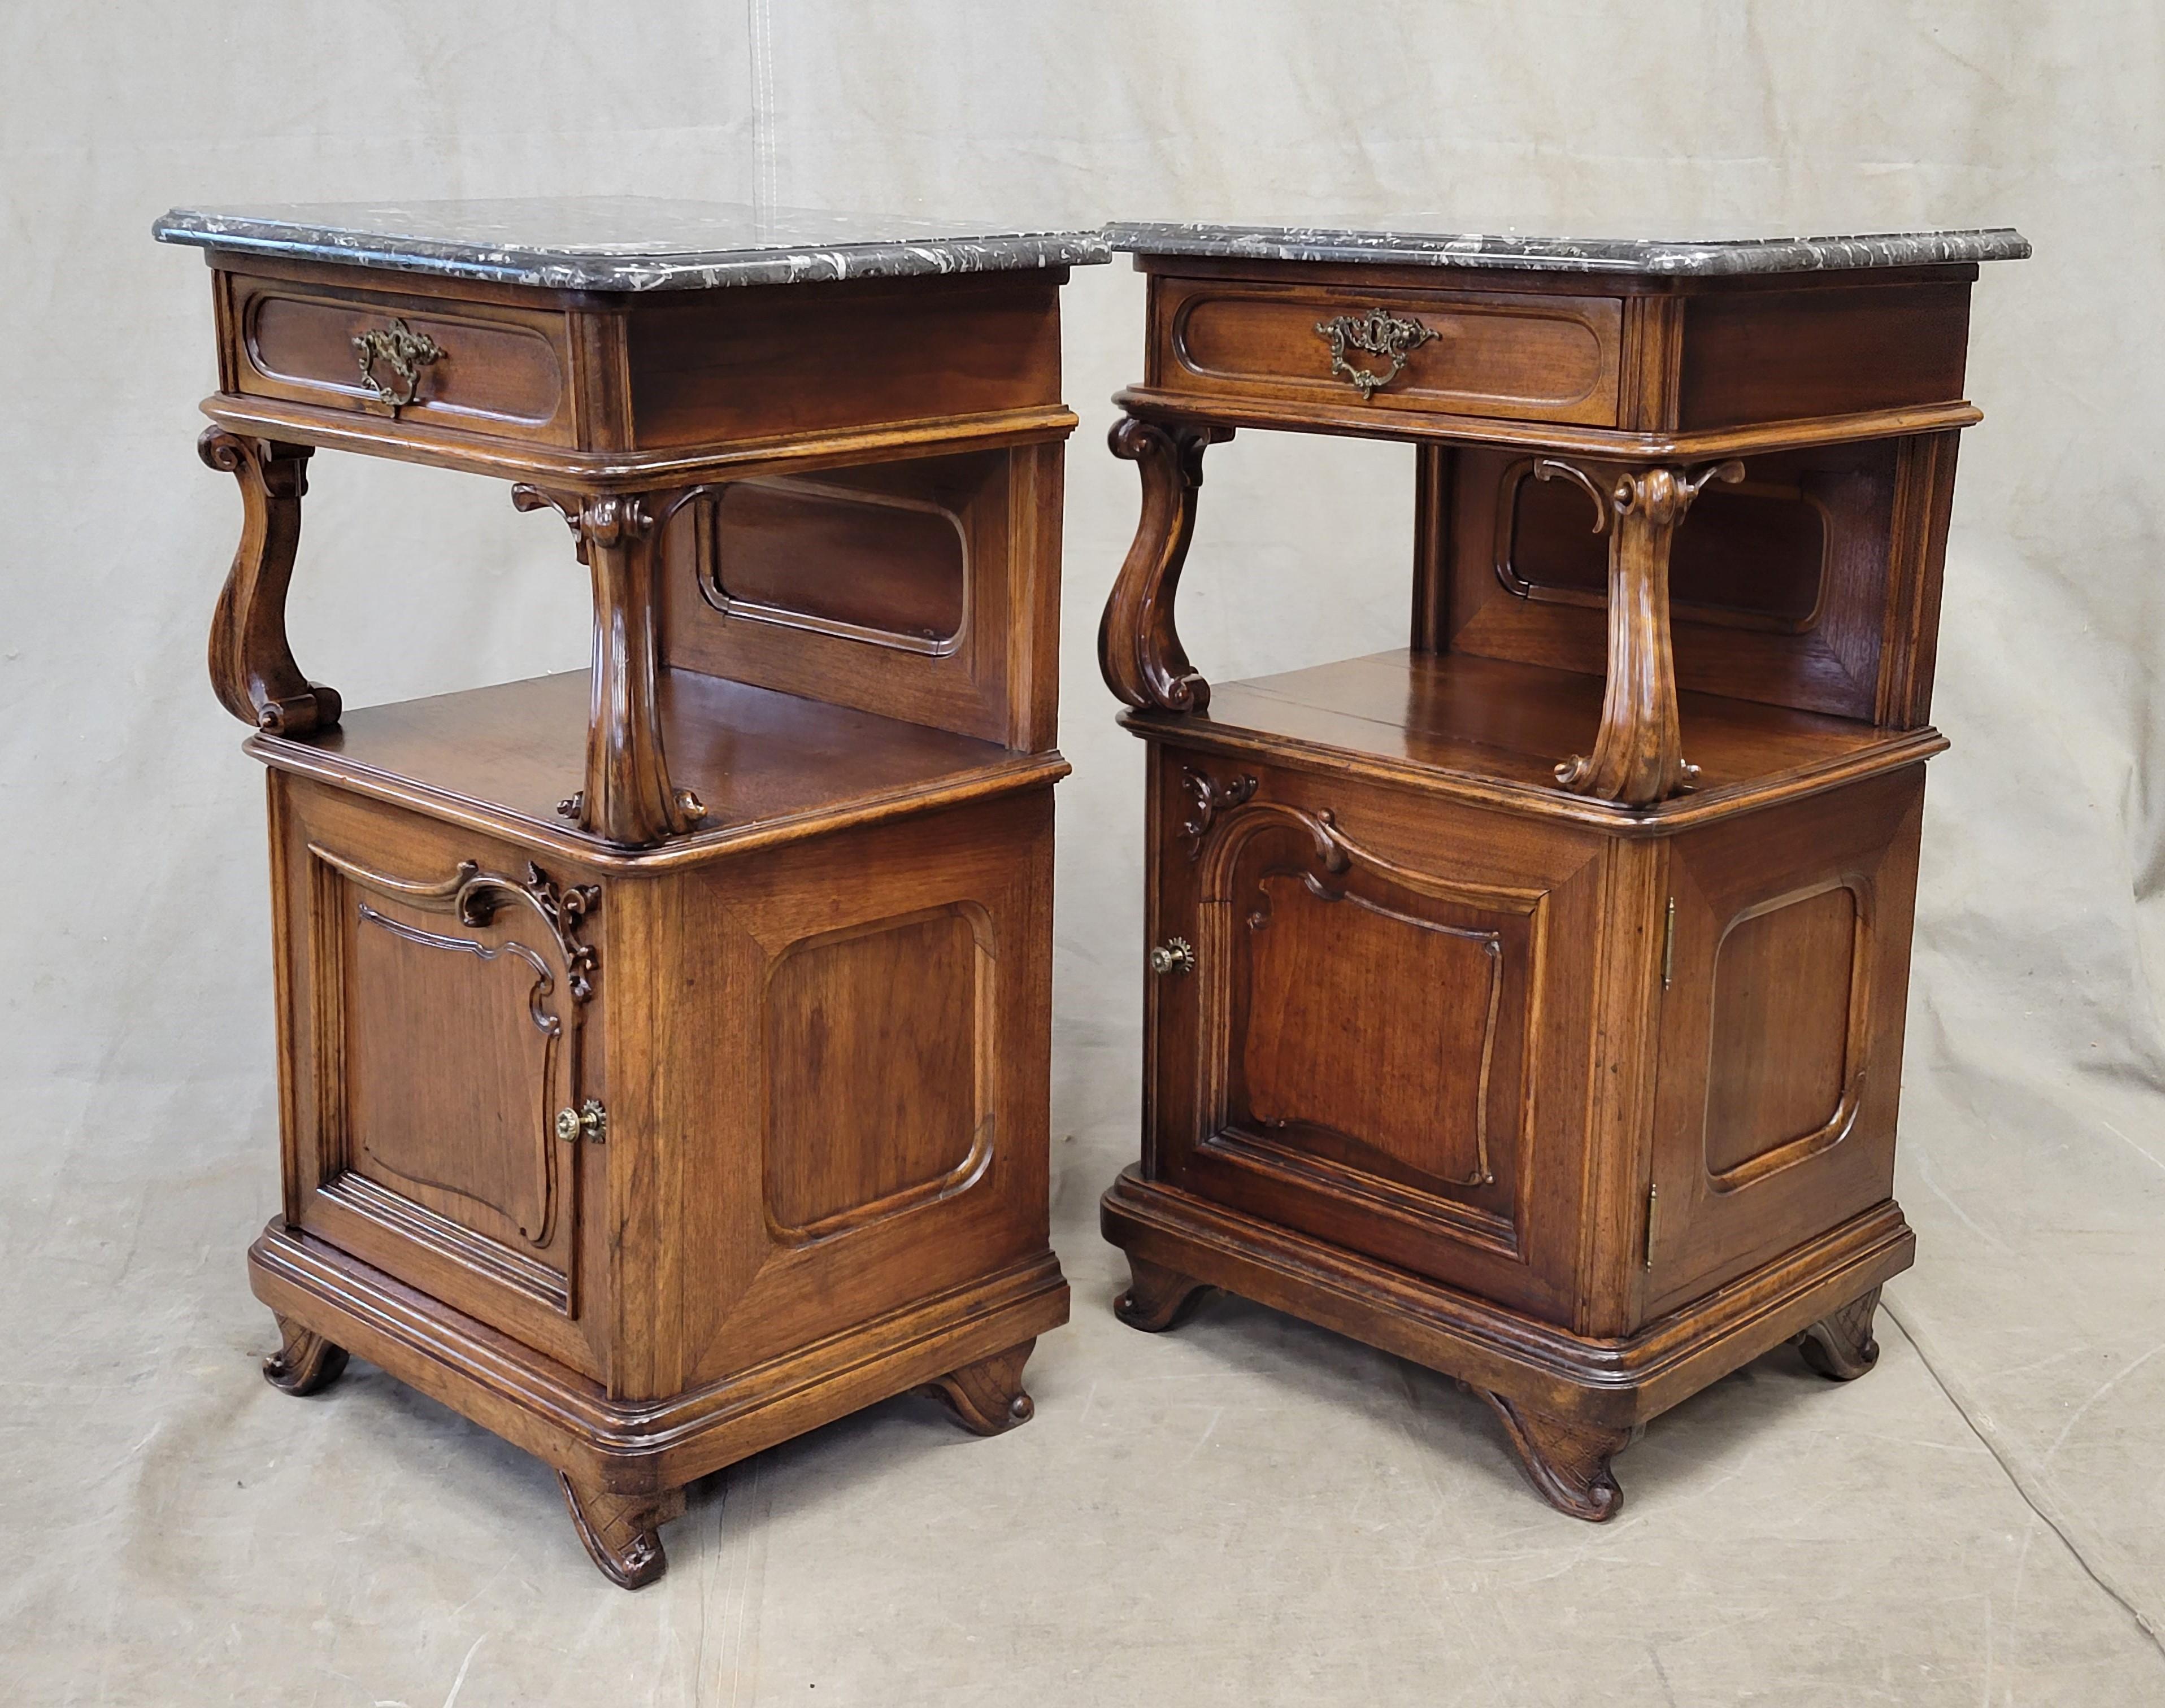 A gorgeous pair of high-end, antique Austrian art nouveau walnut nightstands / pot cupboards with original black marble tops. Note the stunning curvilinear accents on the feet, door panel, top supports, and even the drawer pulls. Brass drawer pulls